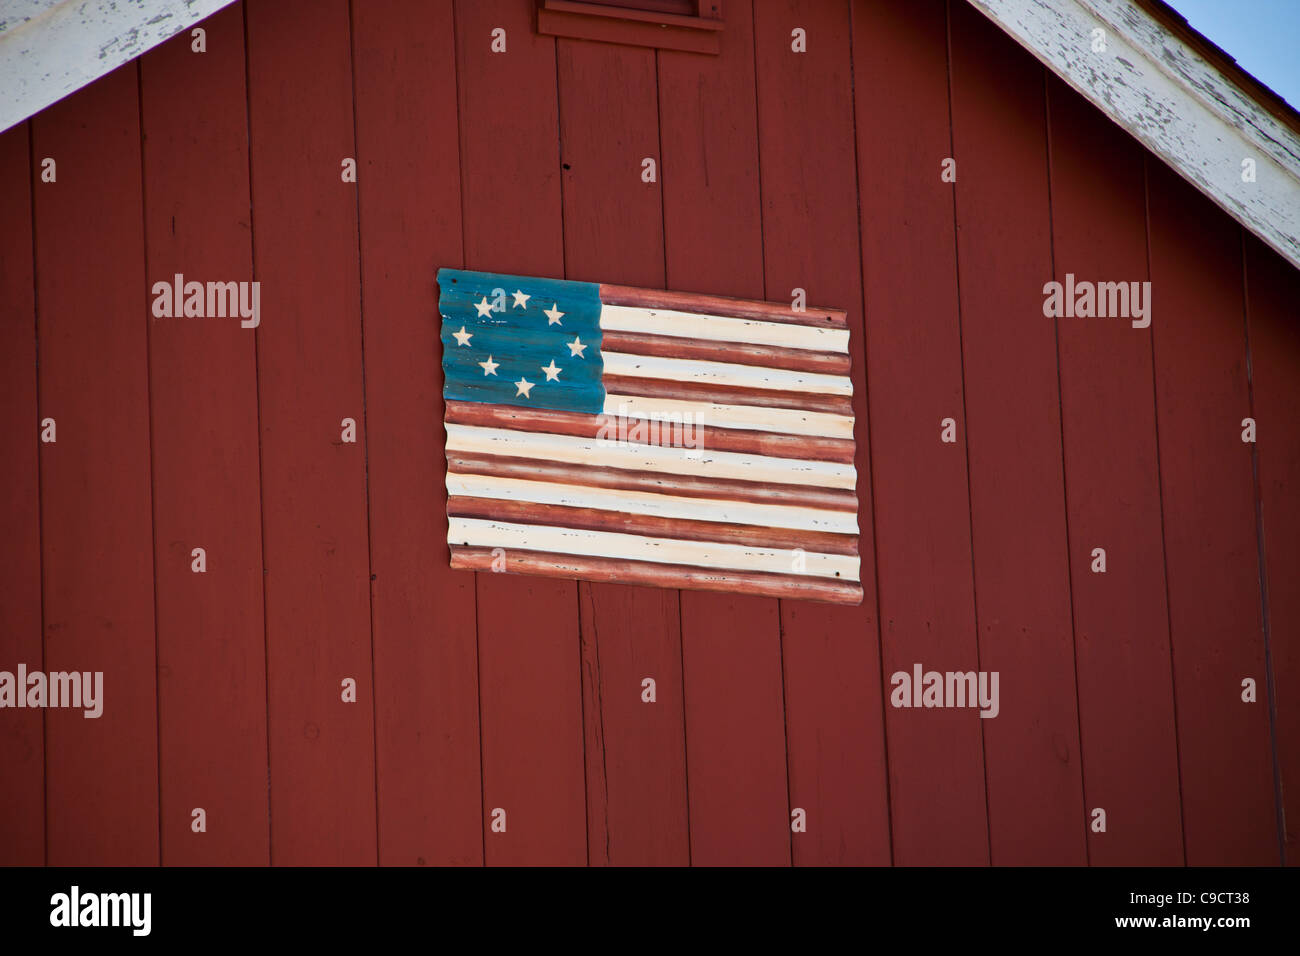 United States Flag displayed at Freeport Town Wharf area at South Freeport harbor, South Freeport, Maine. Stock Photo